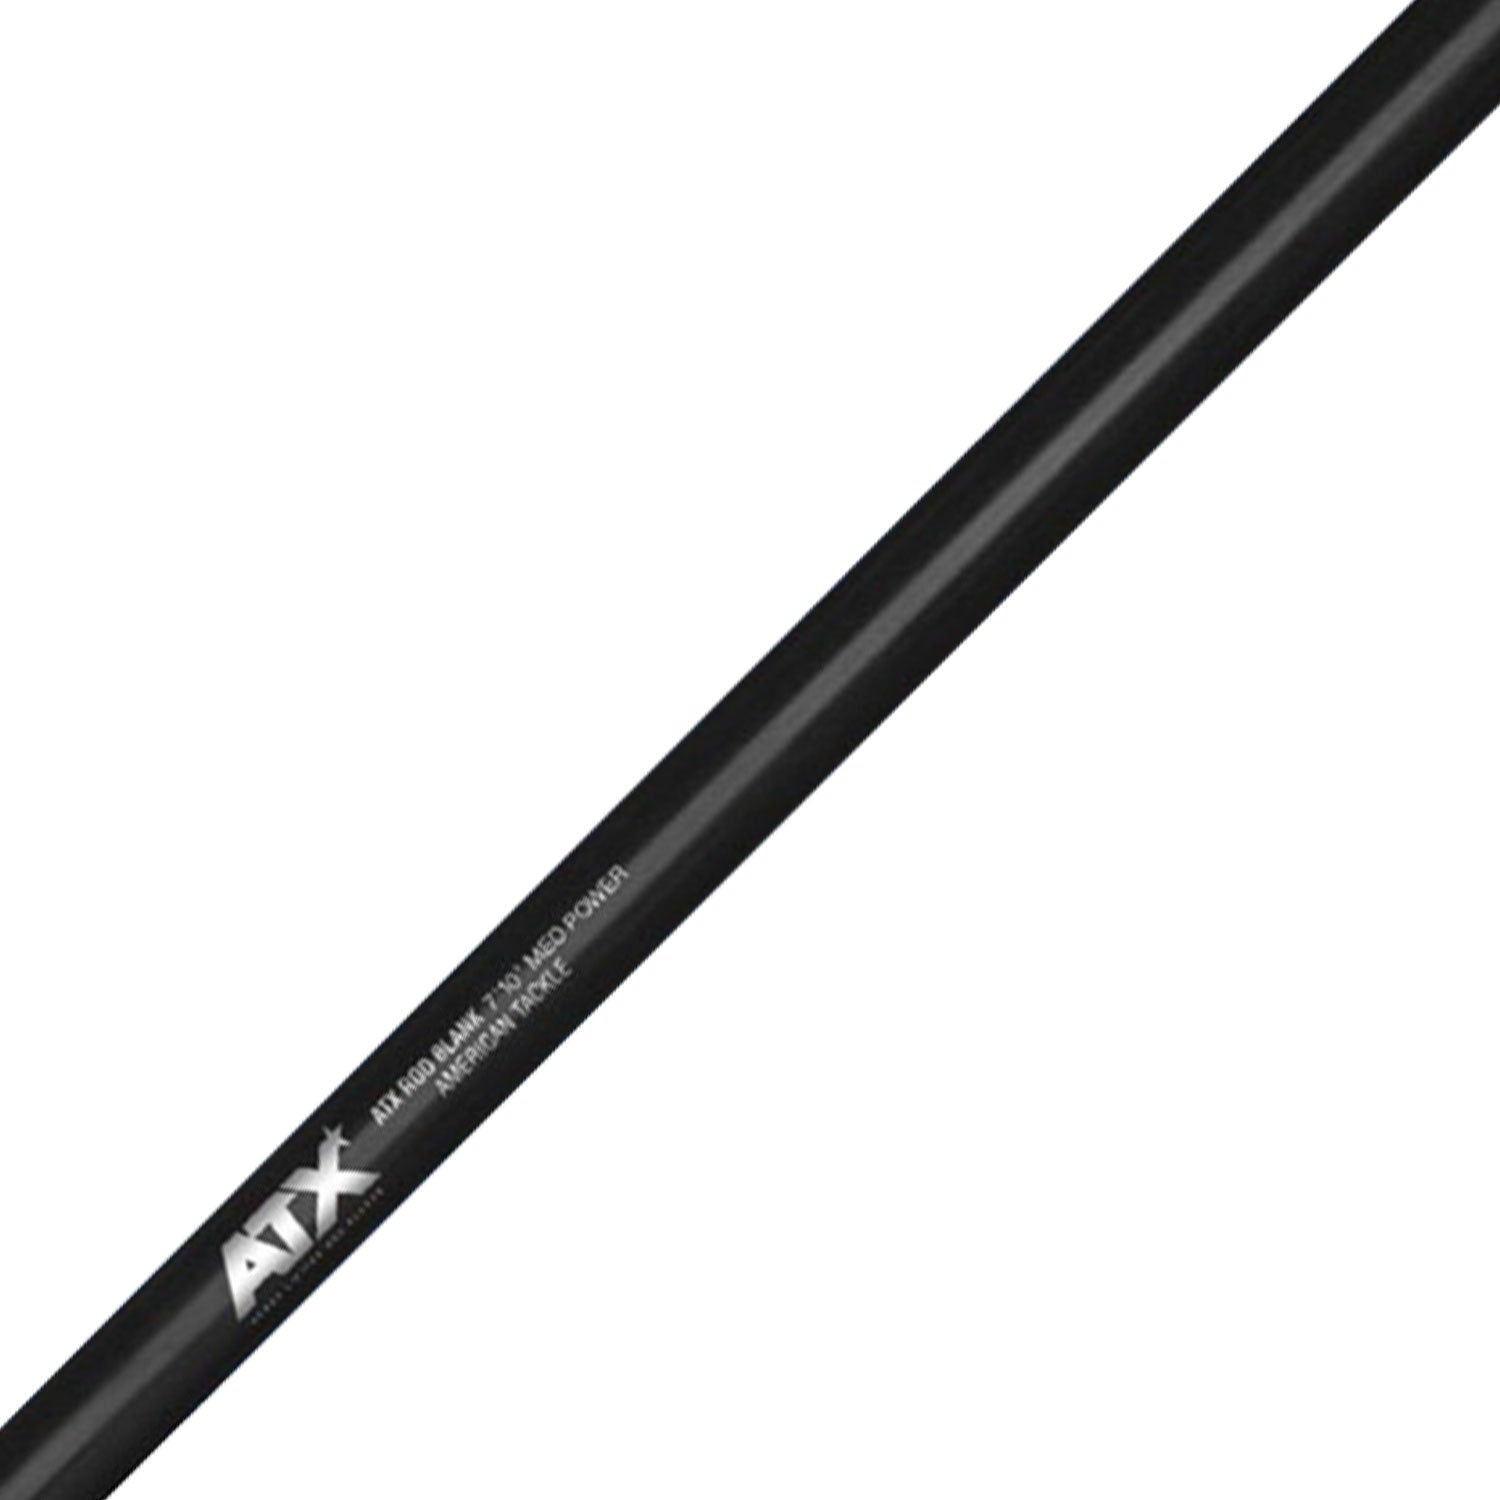 American Tackle AXST66MH Stand-Up Tuna Rod Blank